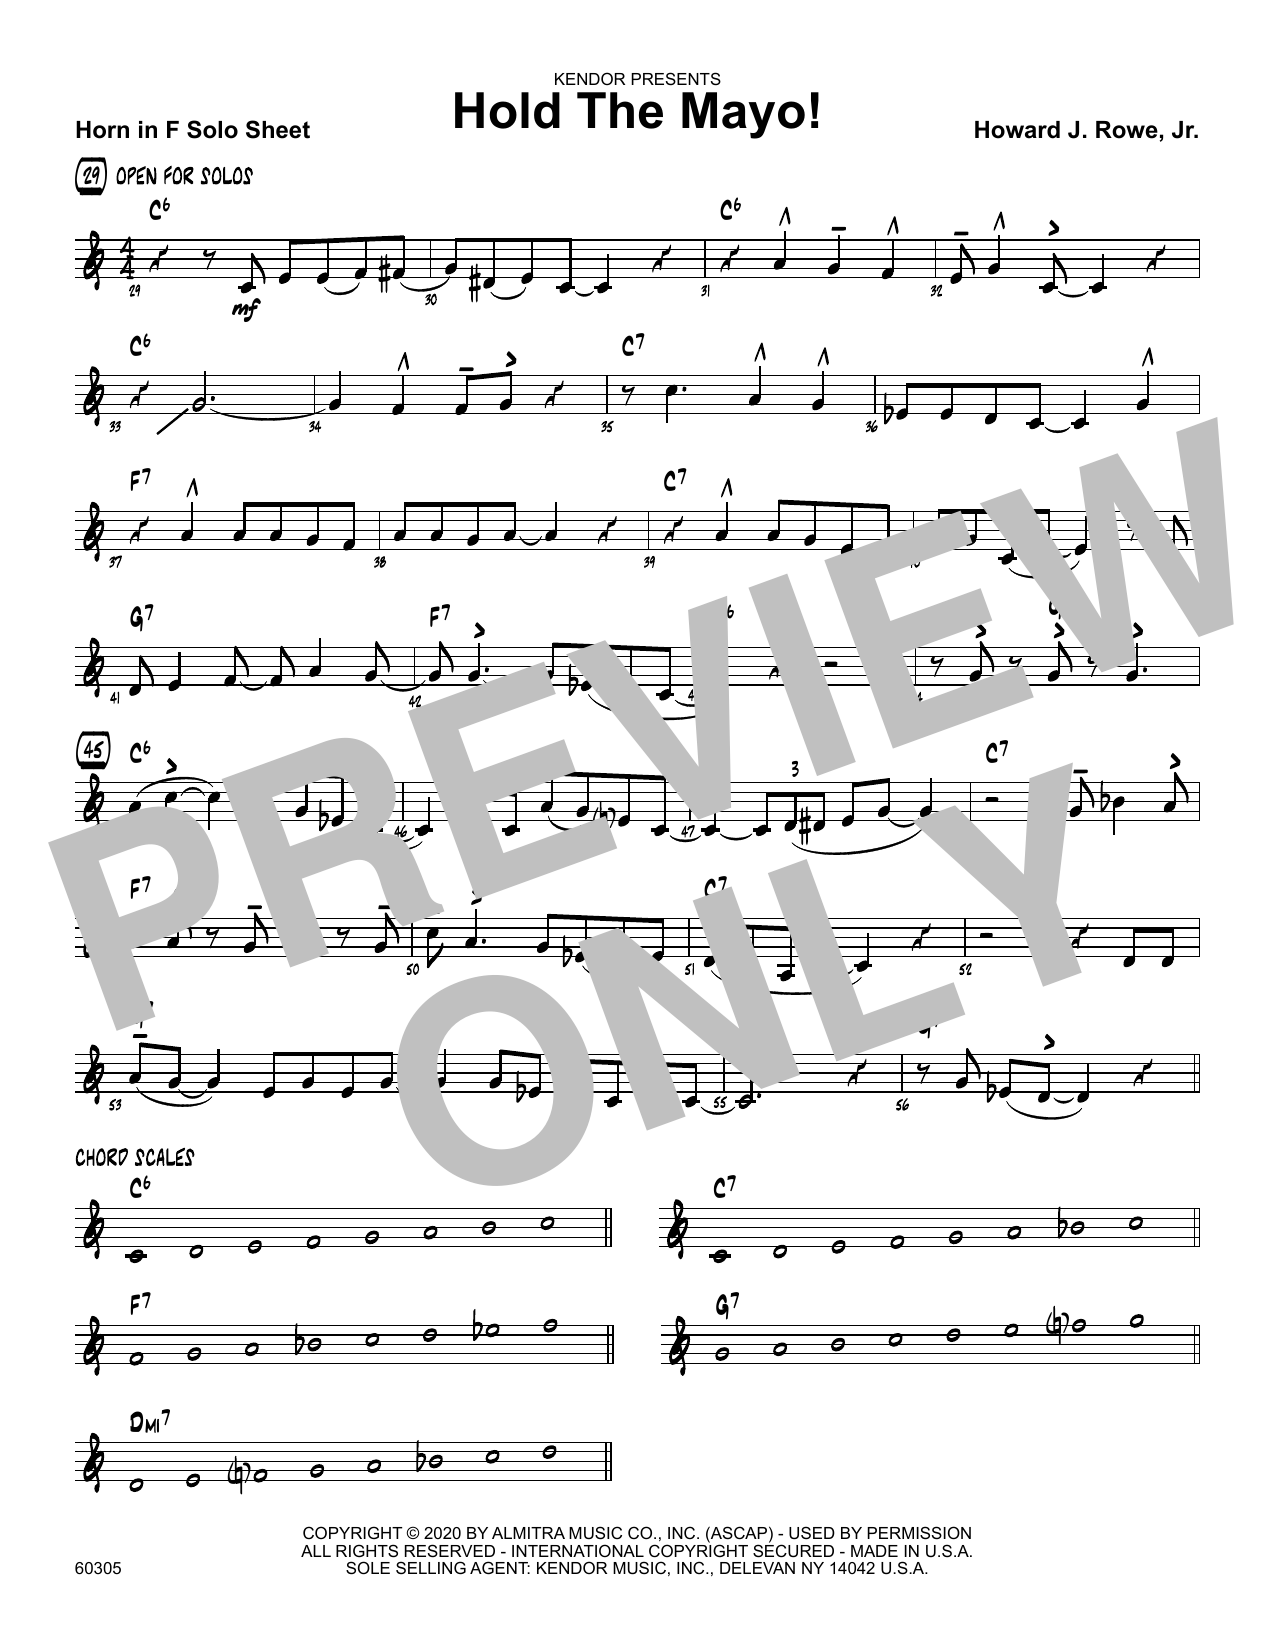 Download Howard Rowe Hold The Mayo! - Solo Sheet - Trumpet Sheet Music